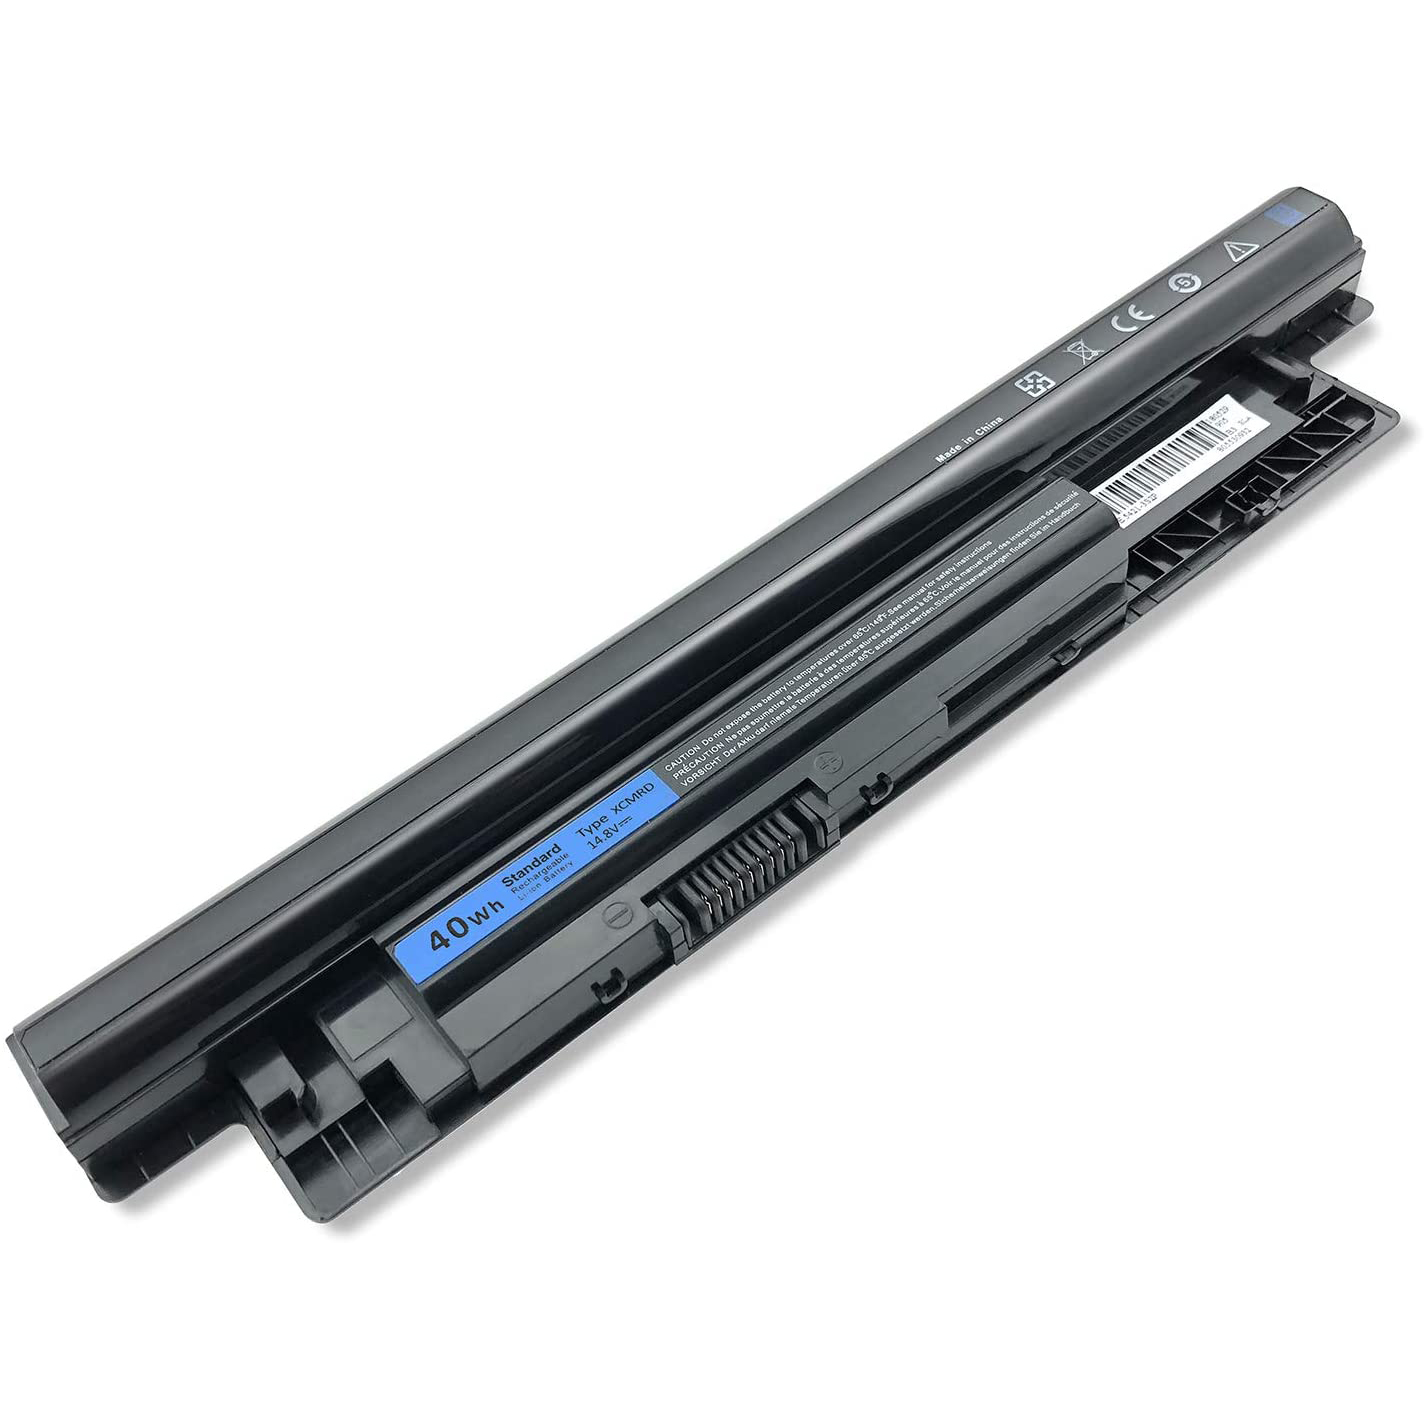 BATTERY FOR NOTEBOOK DELL INSPIRON XCMRD 15 3000 15-3521 15-3537 15-3541 15-3542 15-5521 15-N3521 15-N5421 15-1528 M&M COPY ,Laptop Battery